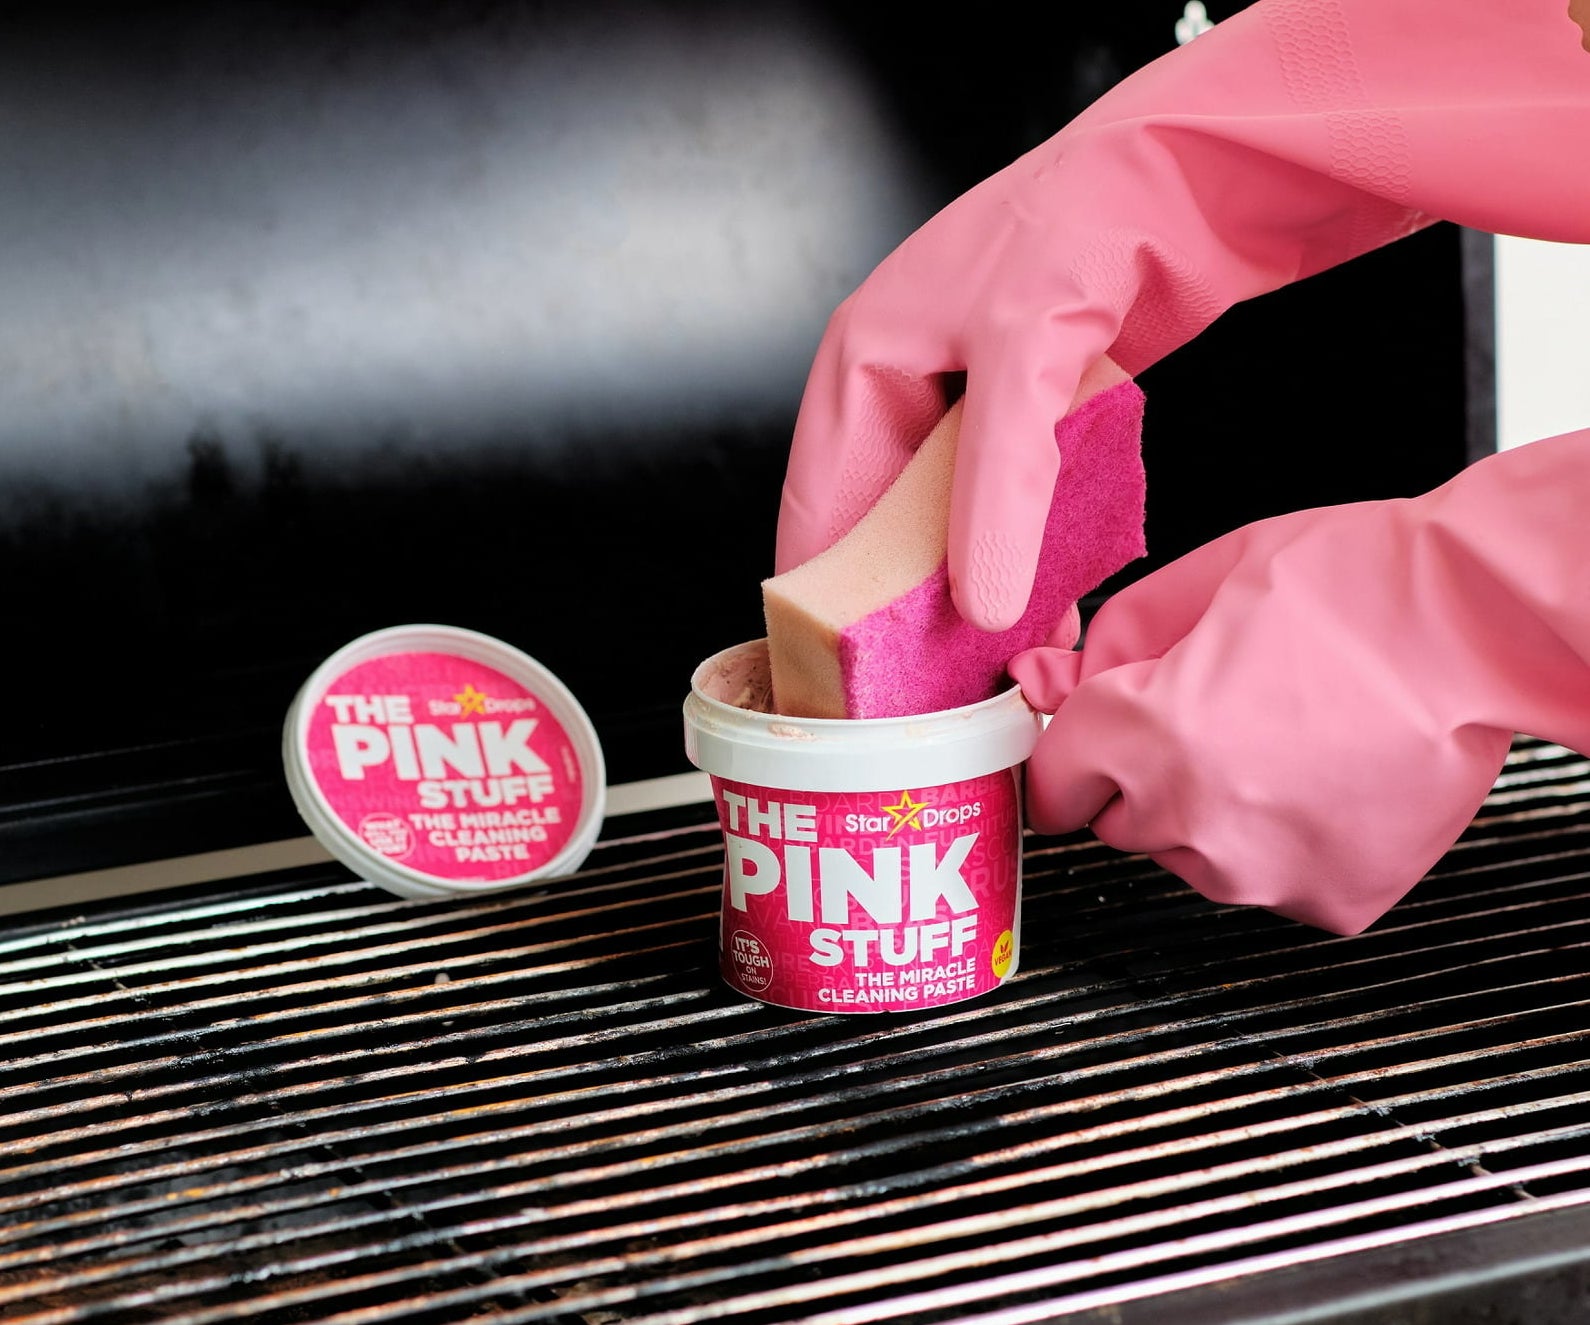 Model using the Pink Stuff on a grill with a sponge